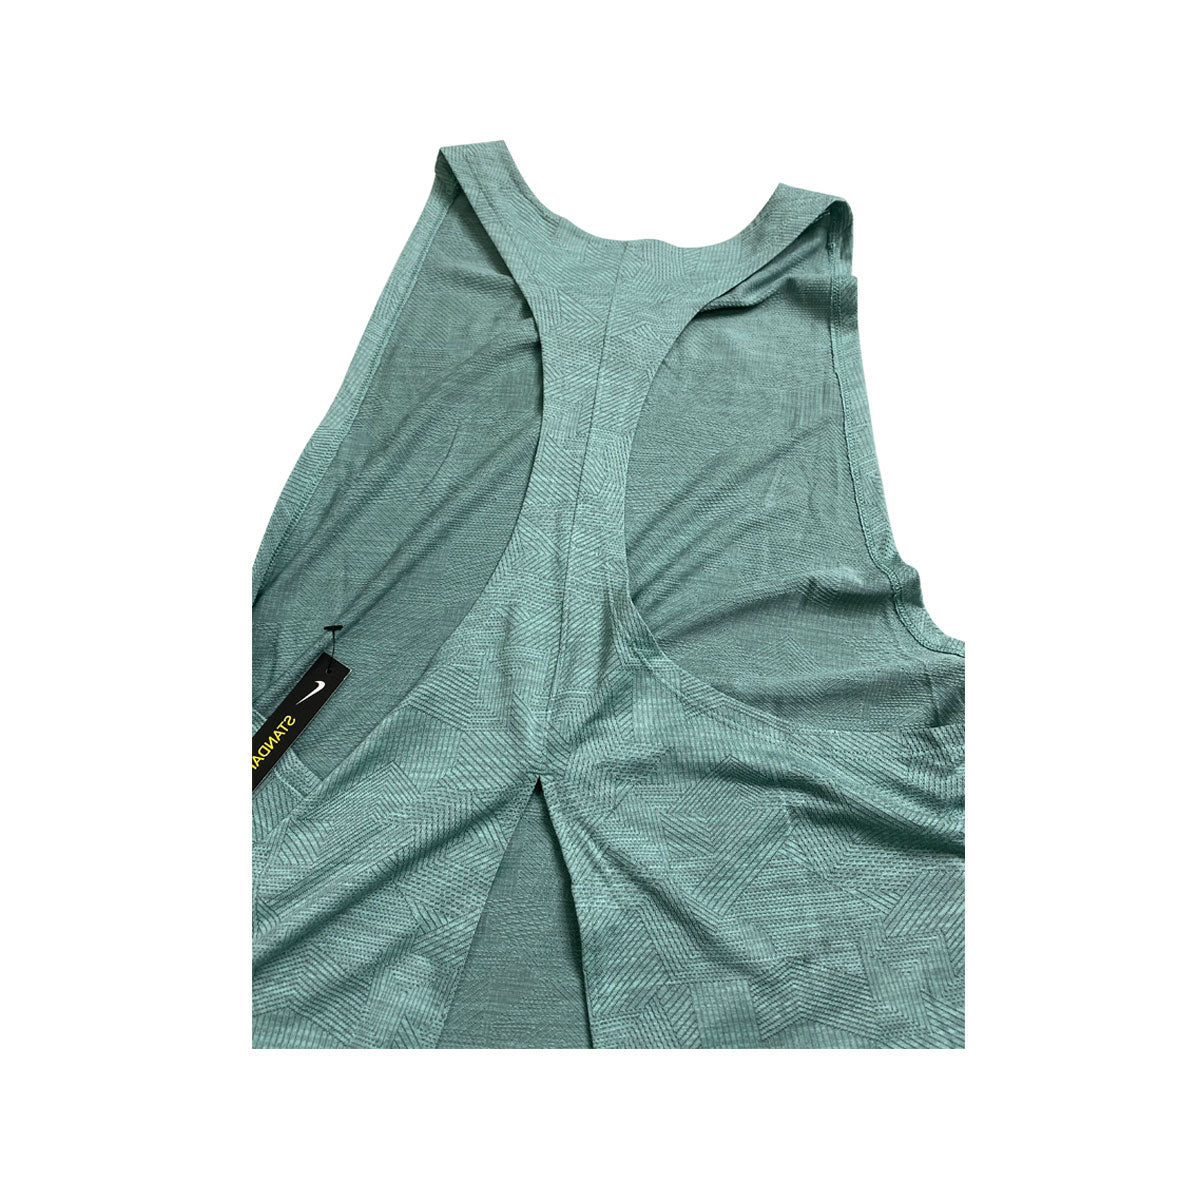 Nike Women's Active Mossy Green Workout Tank